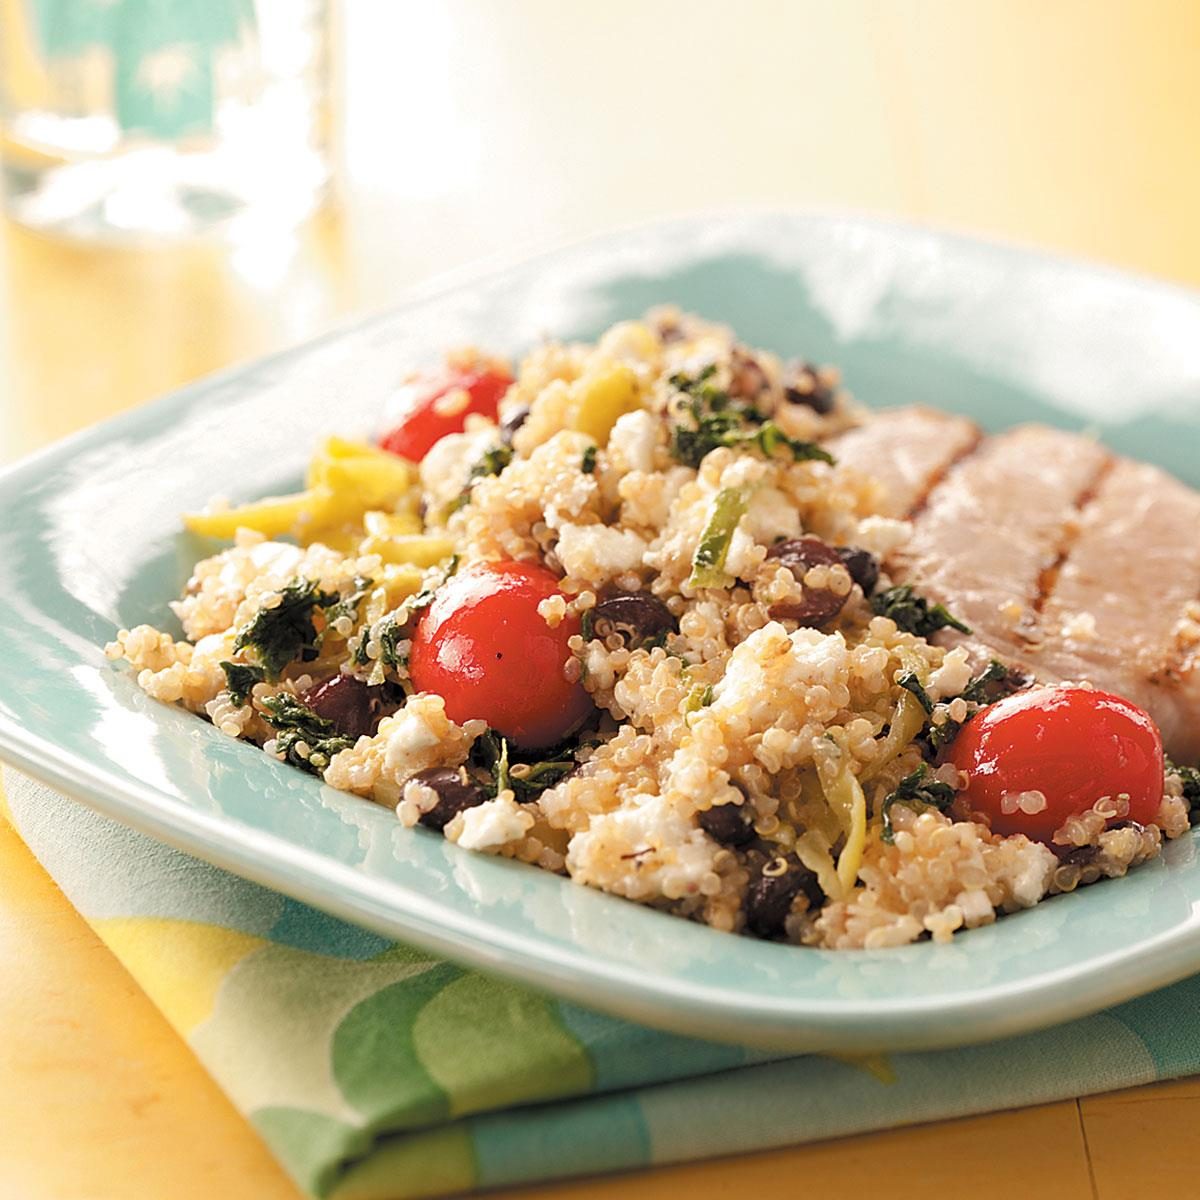 Inspired by: Modern Greek with Quinoa Salad